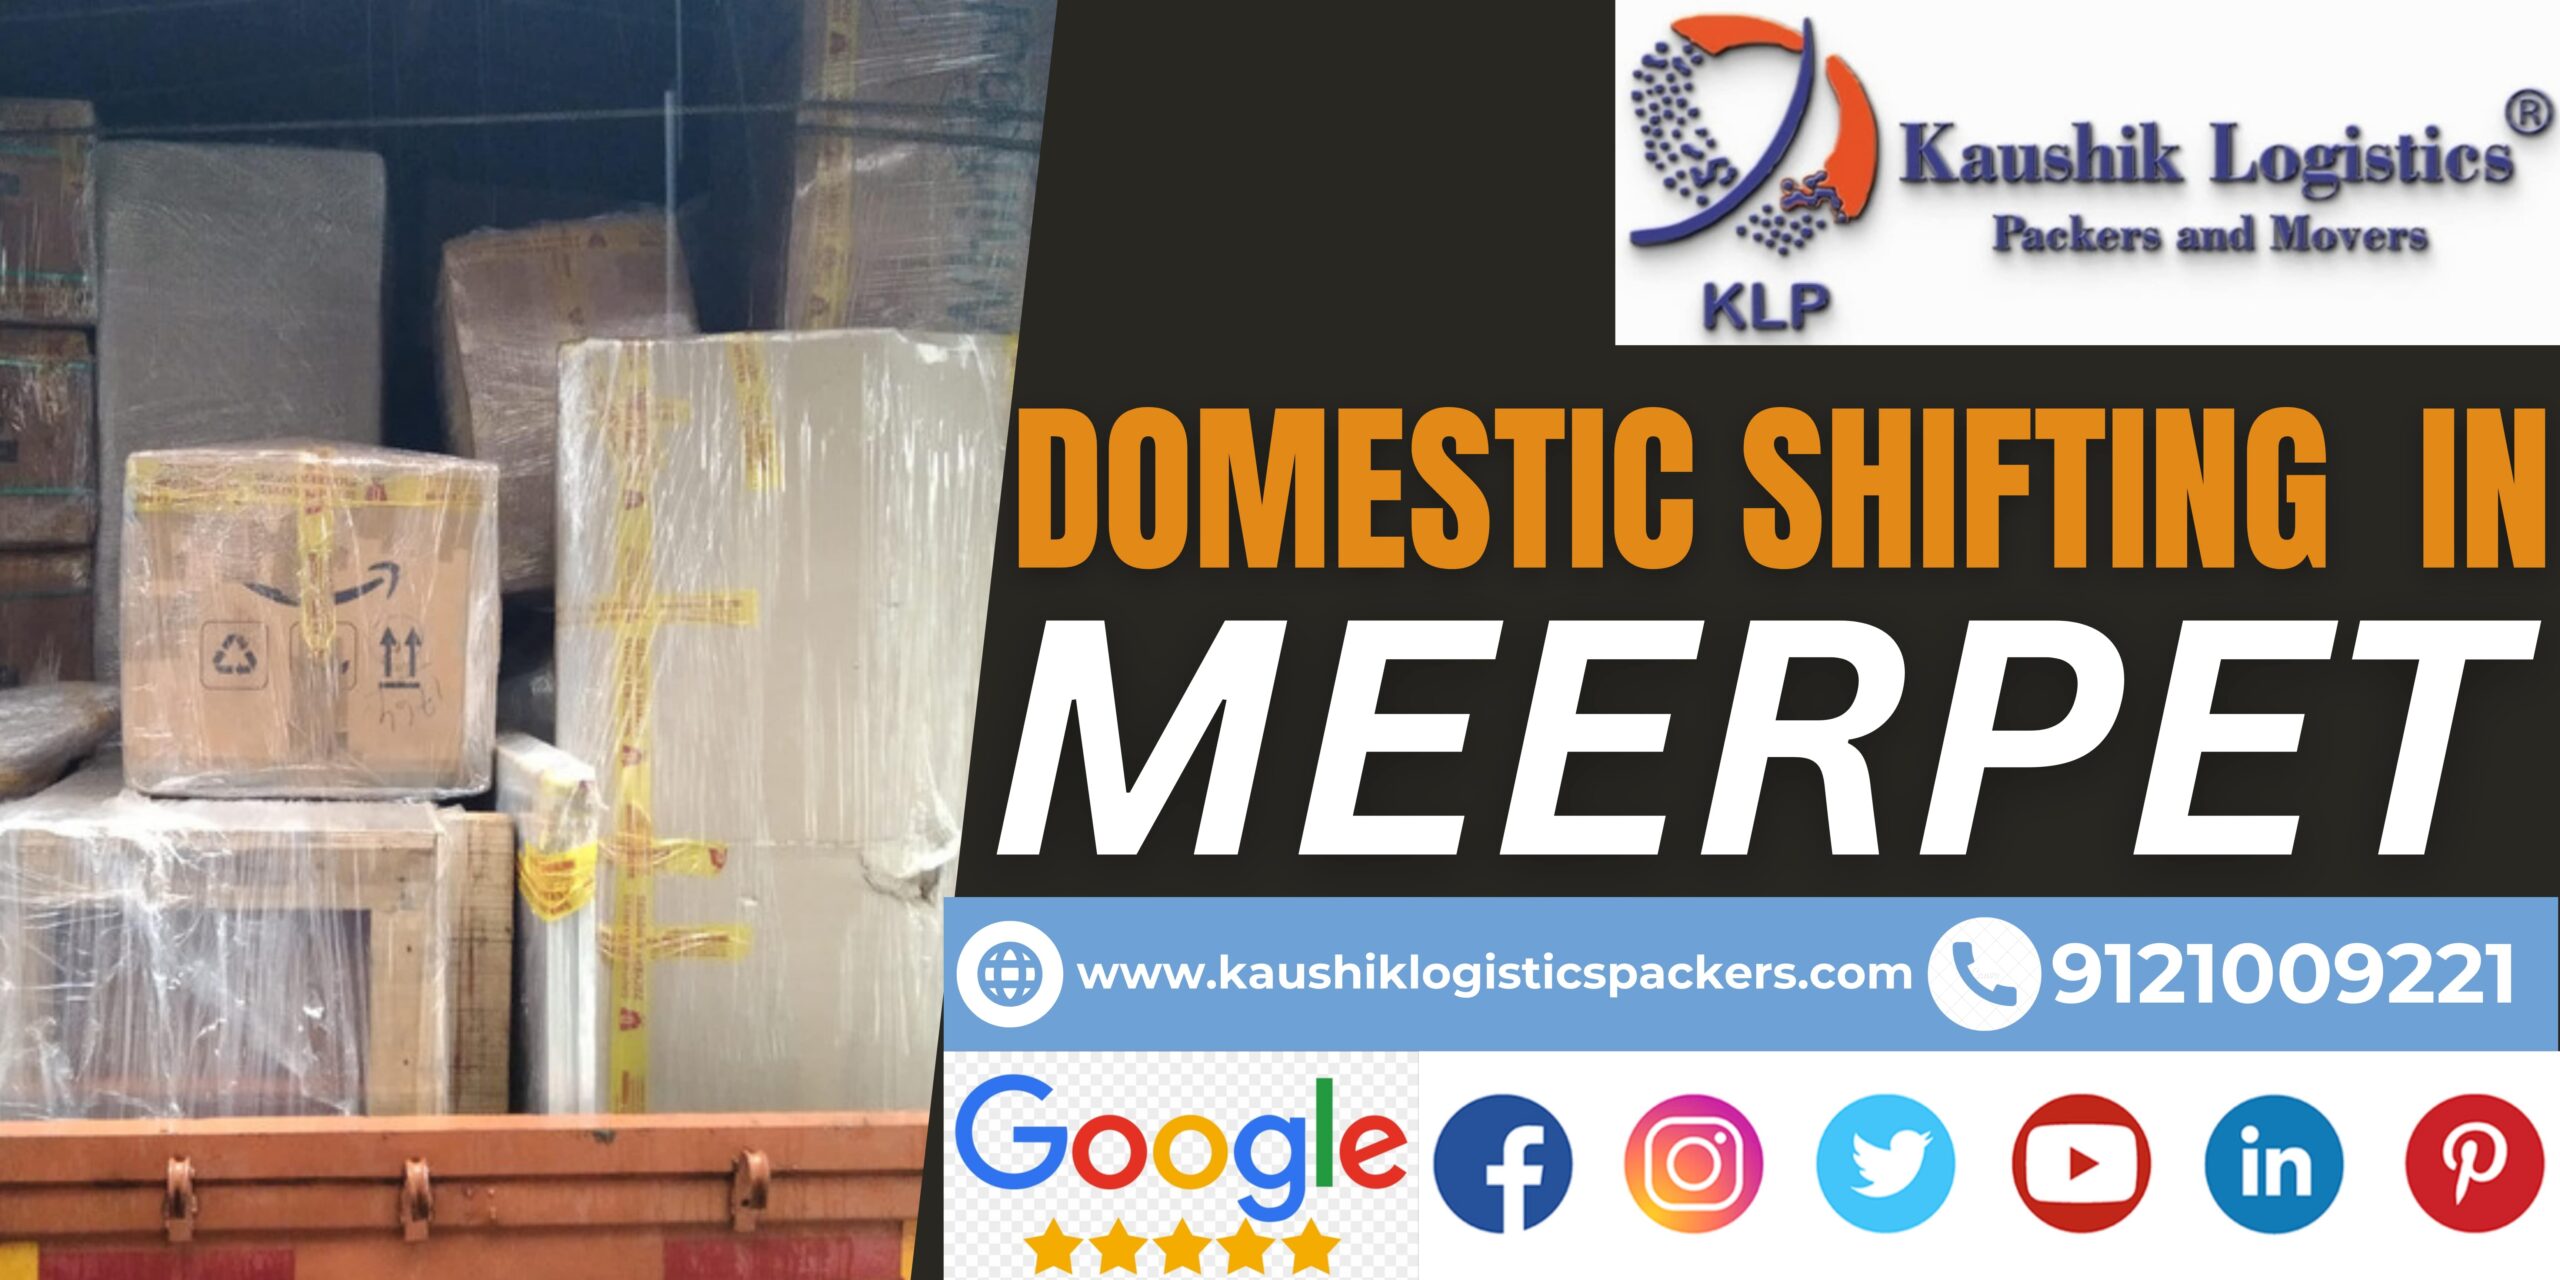 Packers and Movers In Meerpet